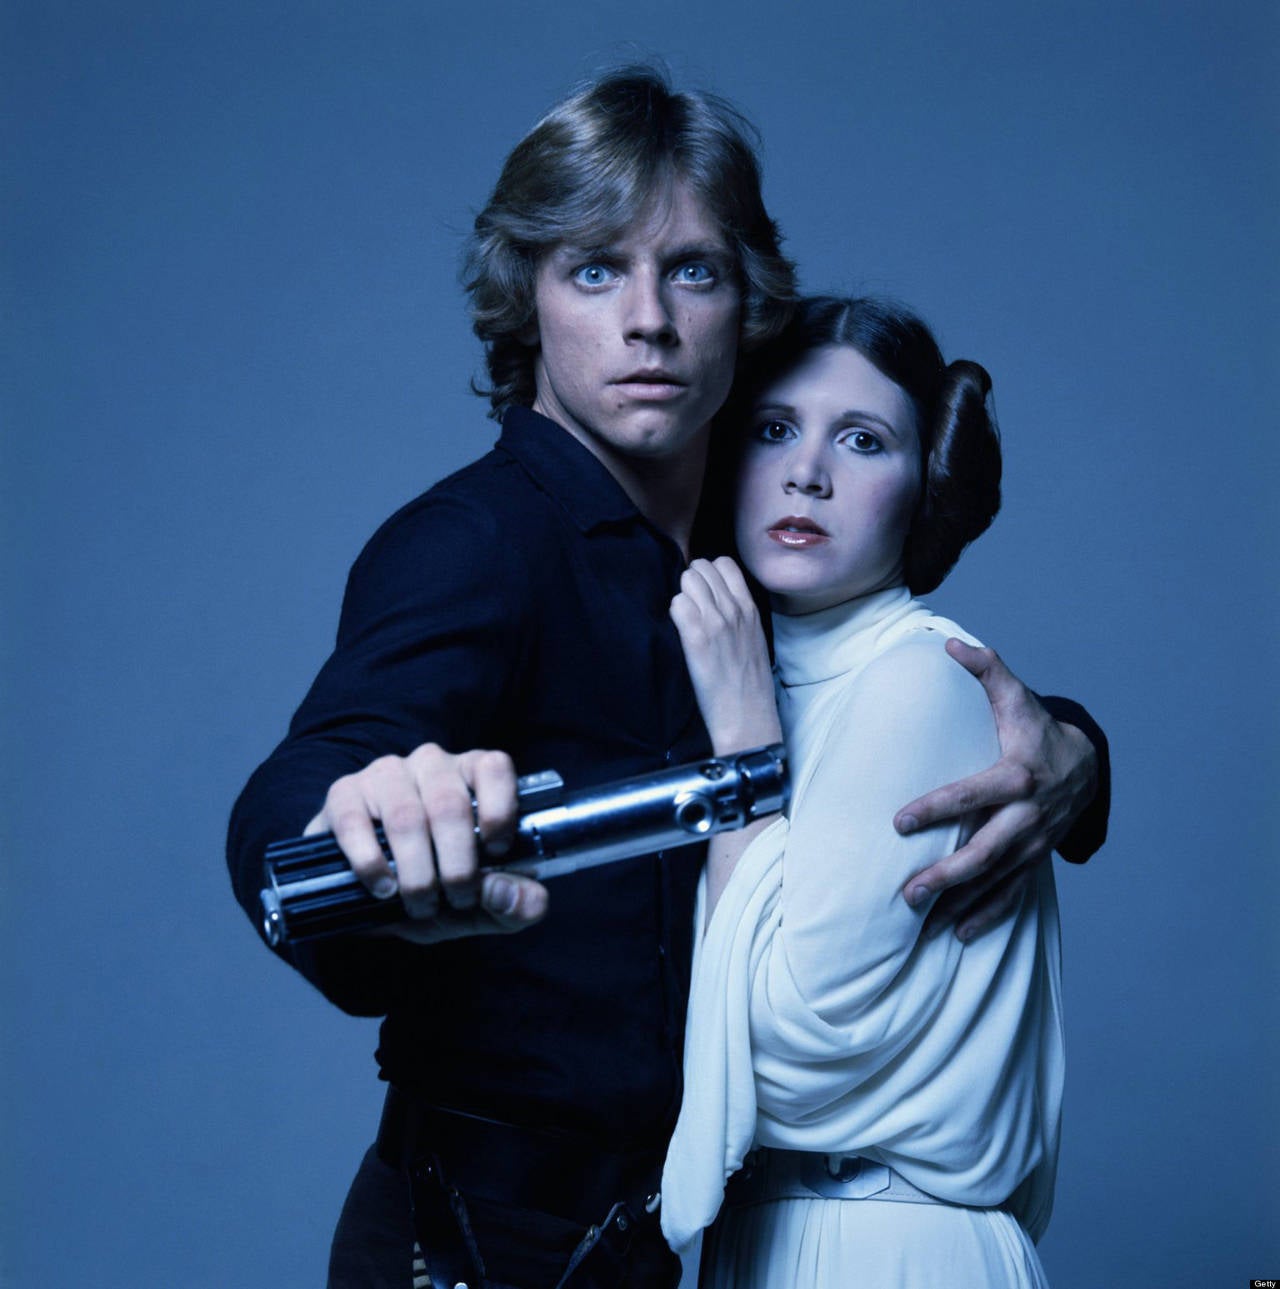 Luke and Leia (Mark Hamill and Carrie Fisher) Star Wars